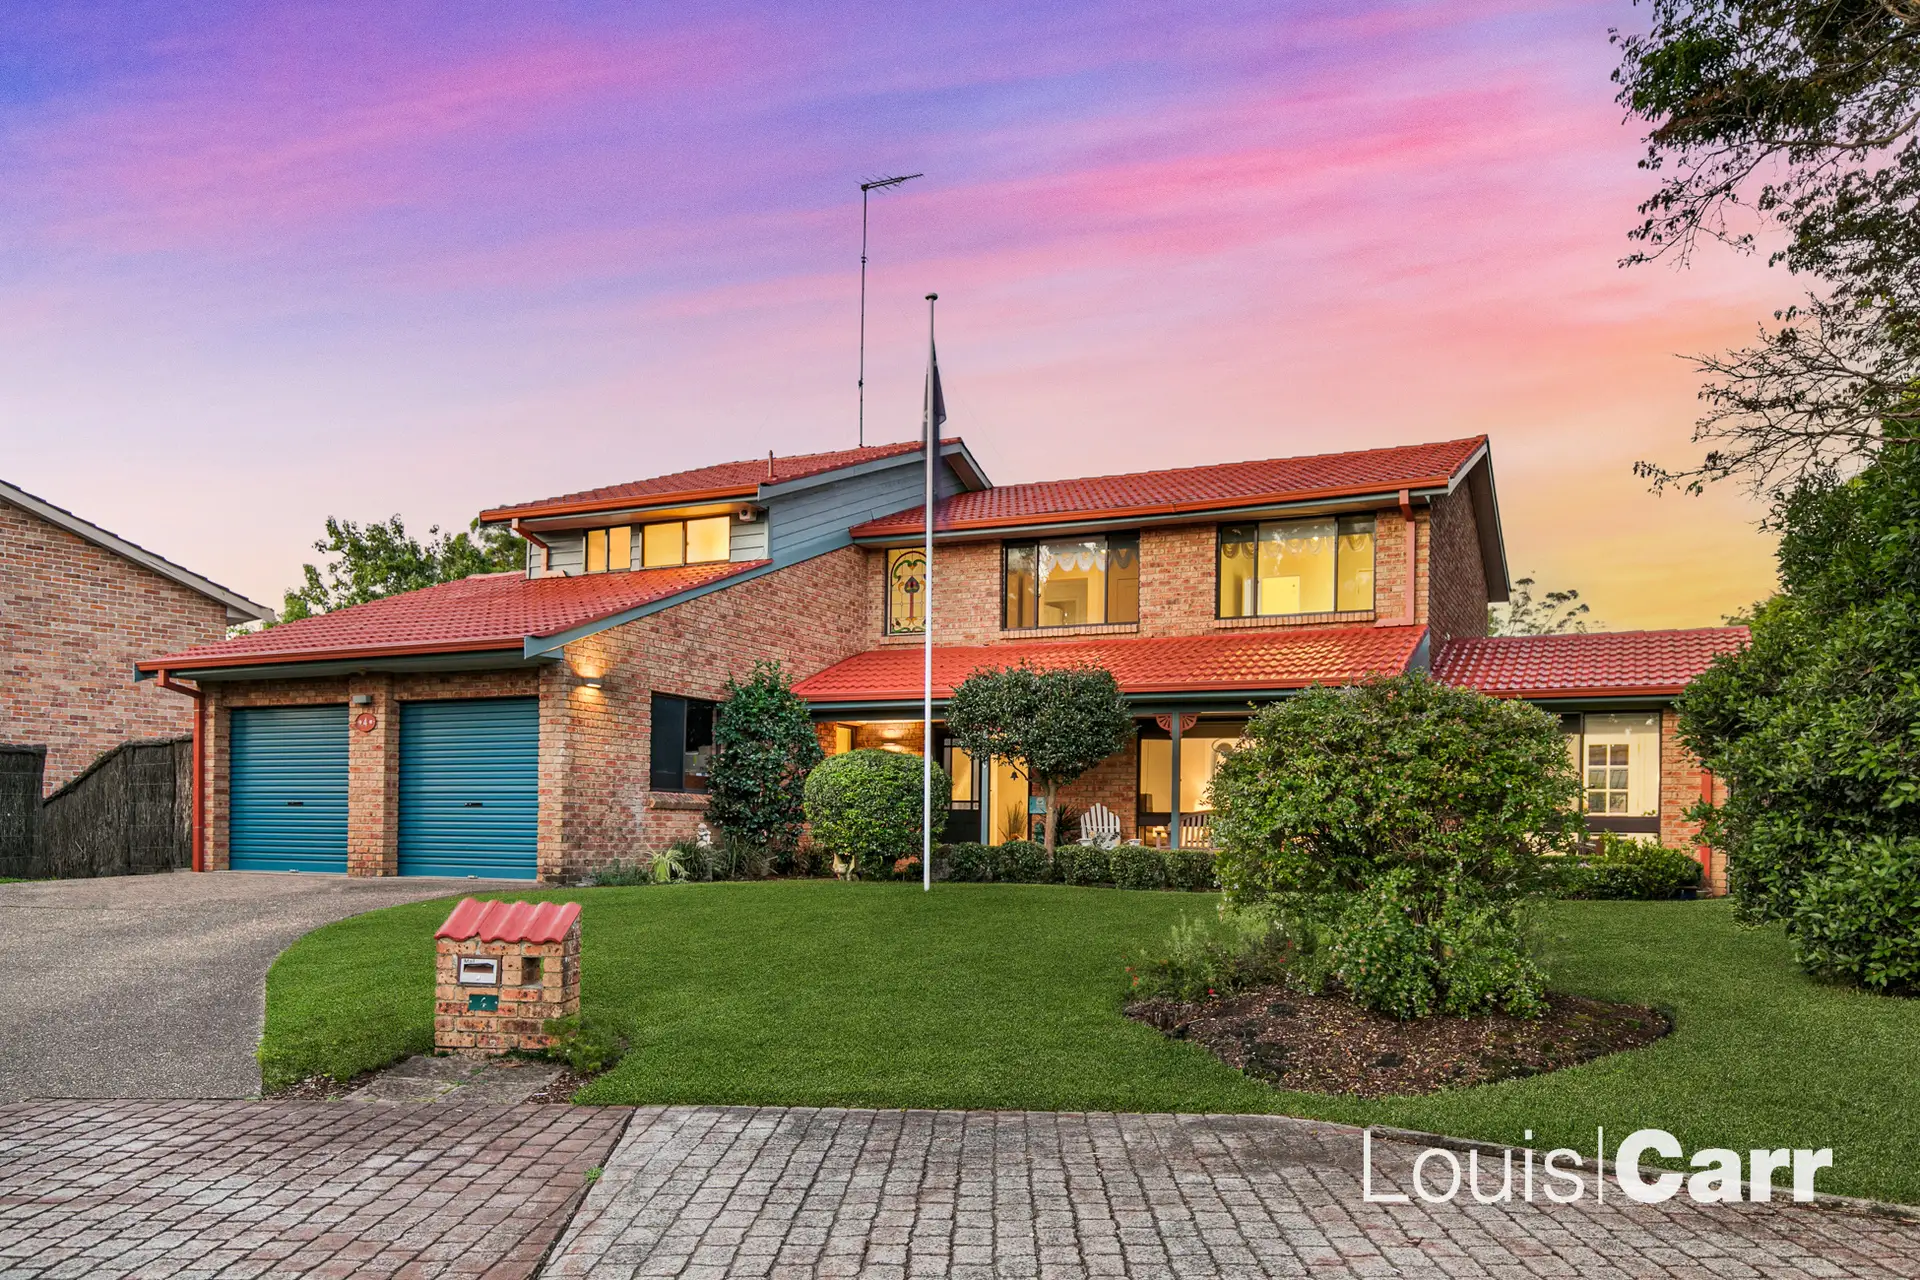 Photo #1: 4 Lorikeet Way, West Pennant Hills - Sold by Louis Carr Real Estate